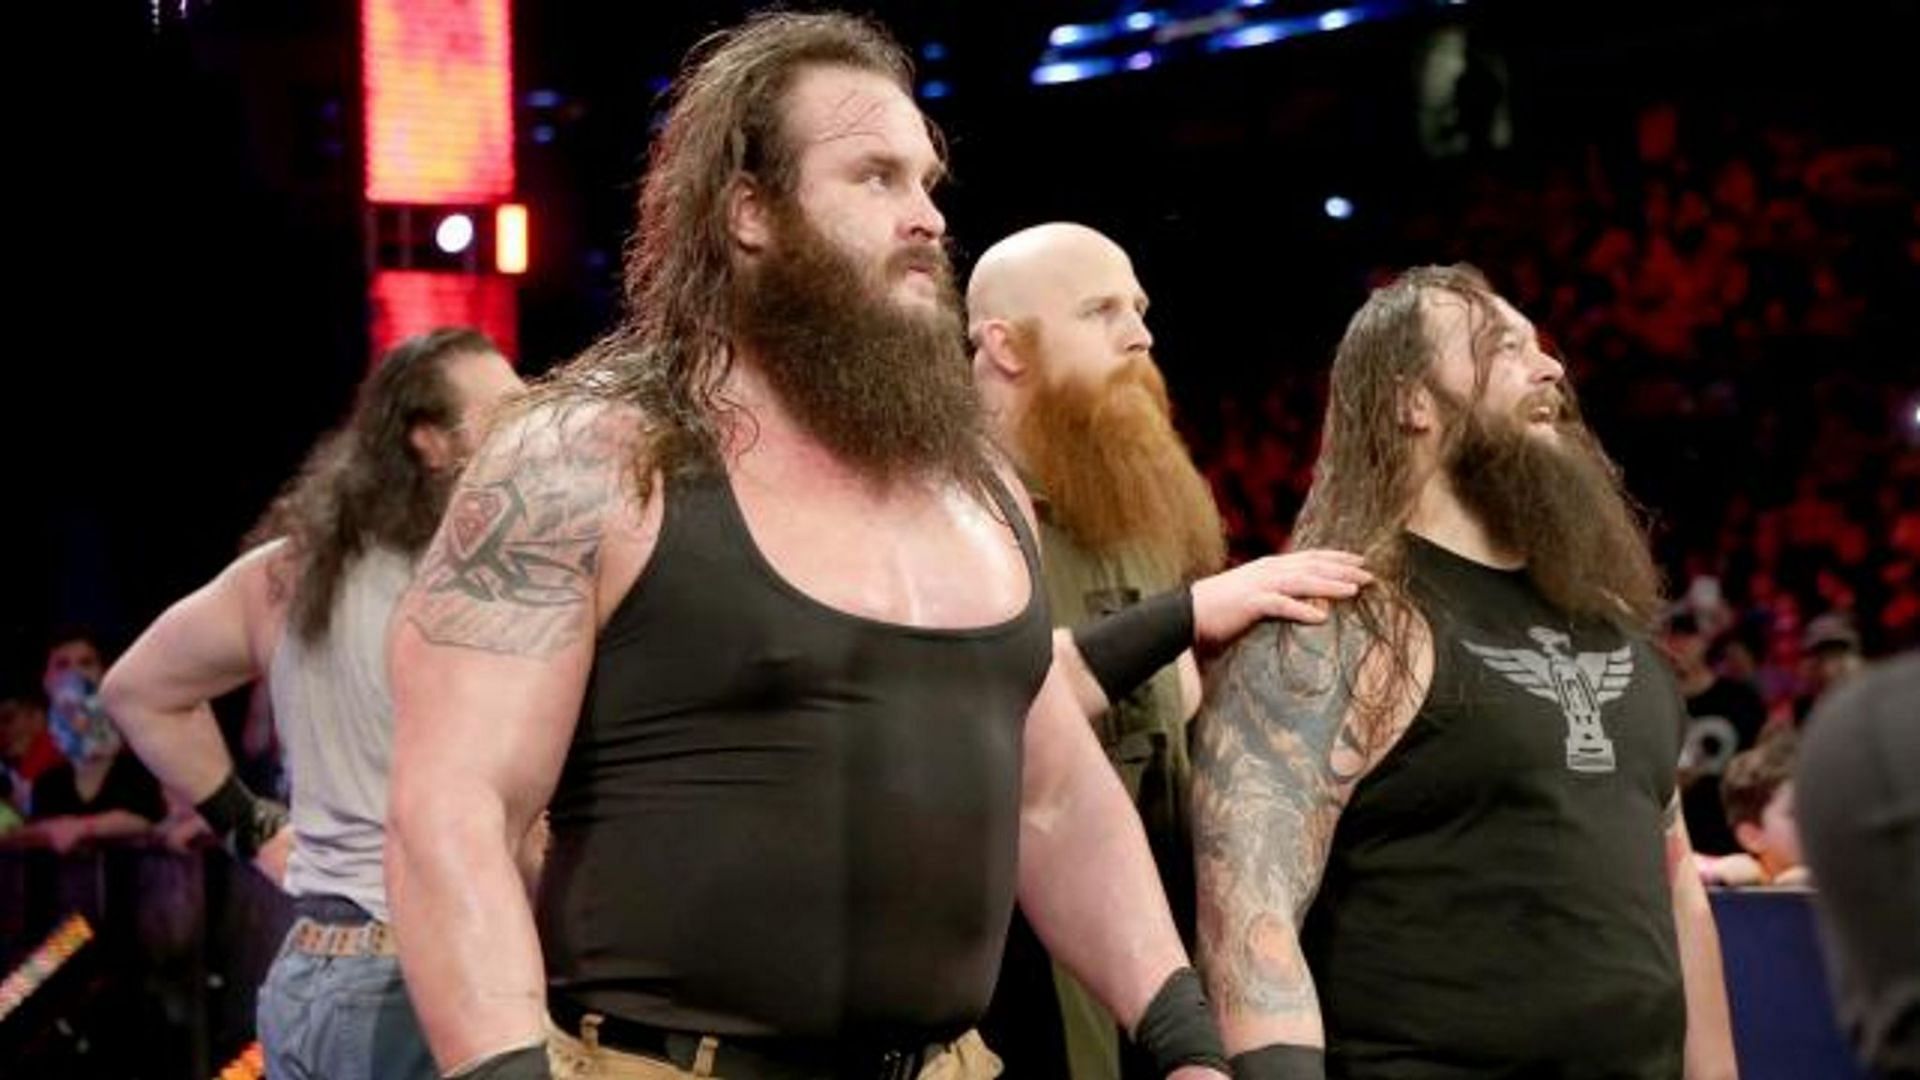 The Wyatt Family was a strong force in WWE